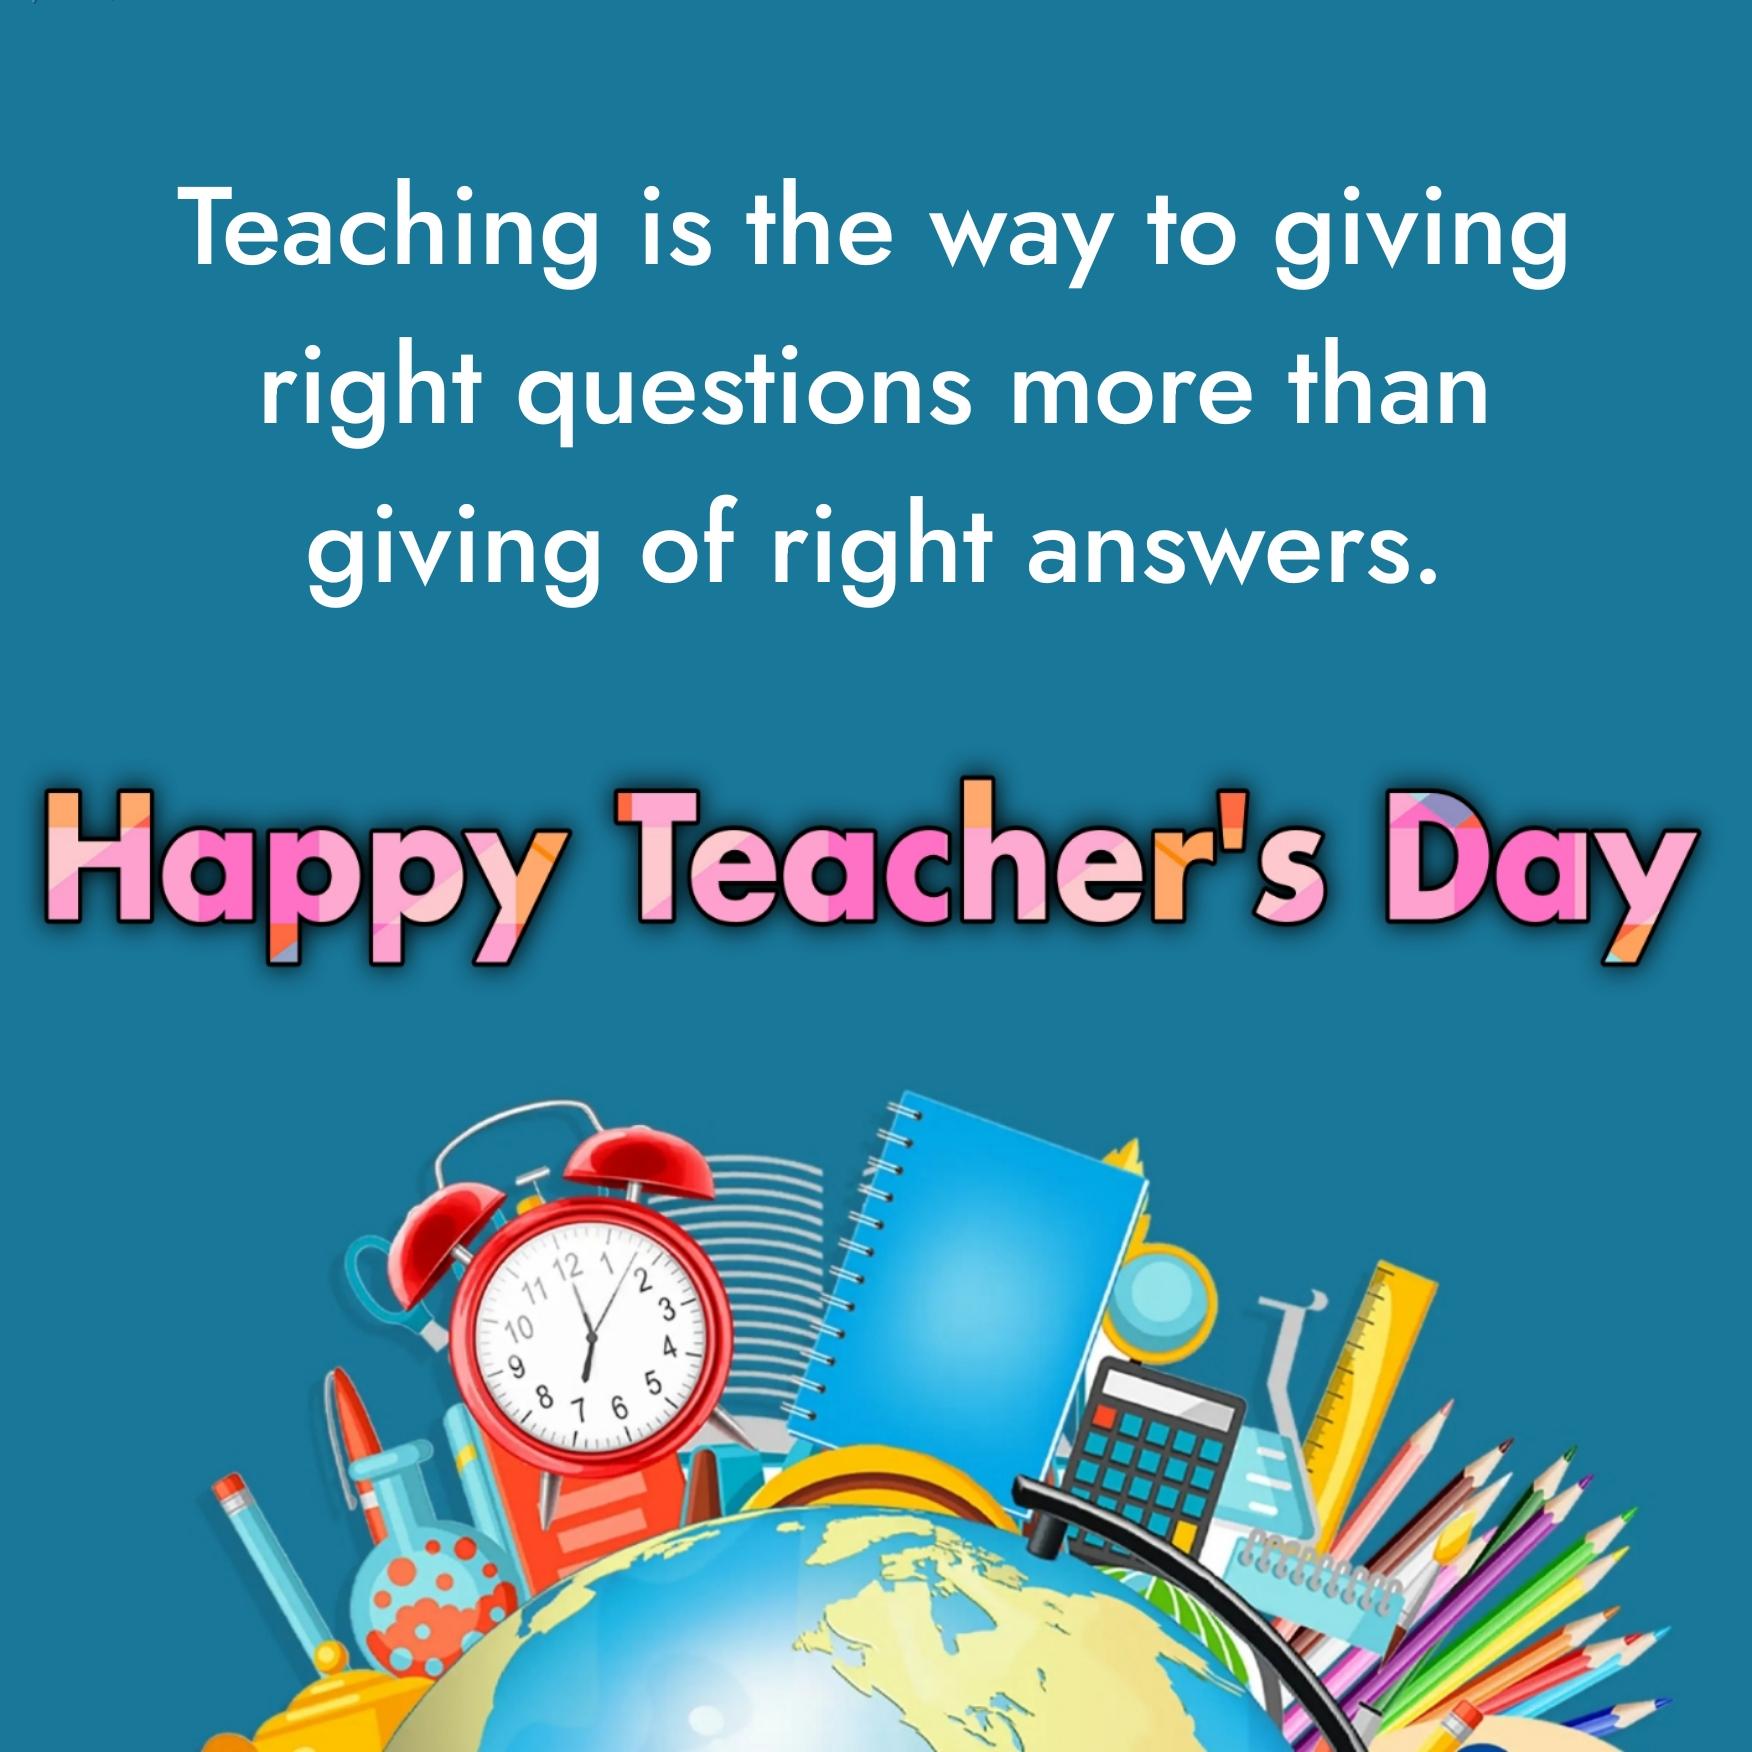 Teaching is the way to giving right questions